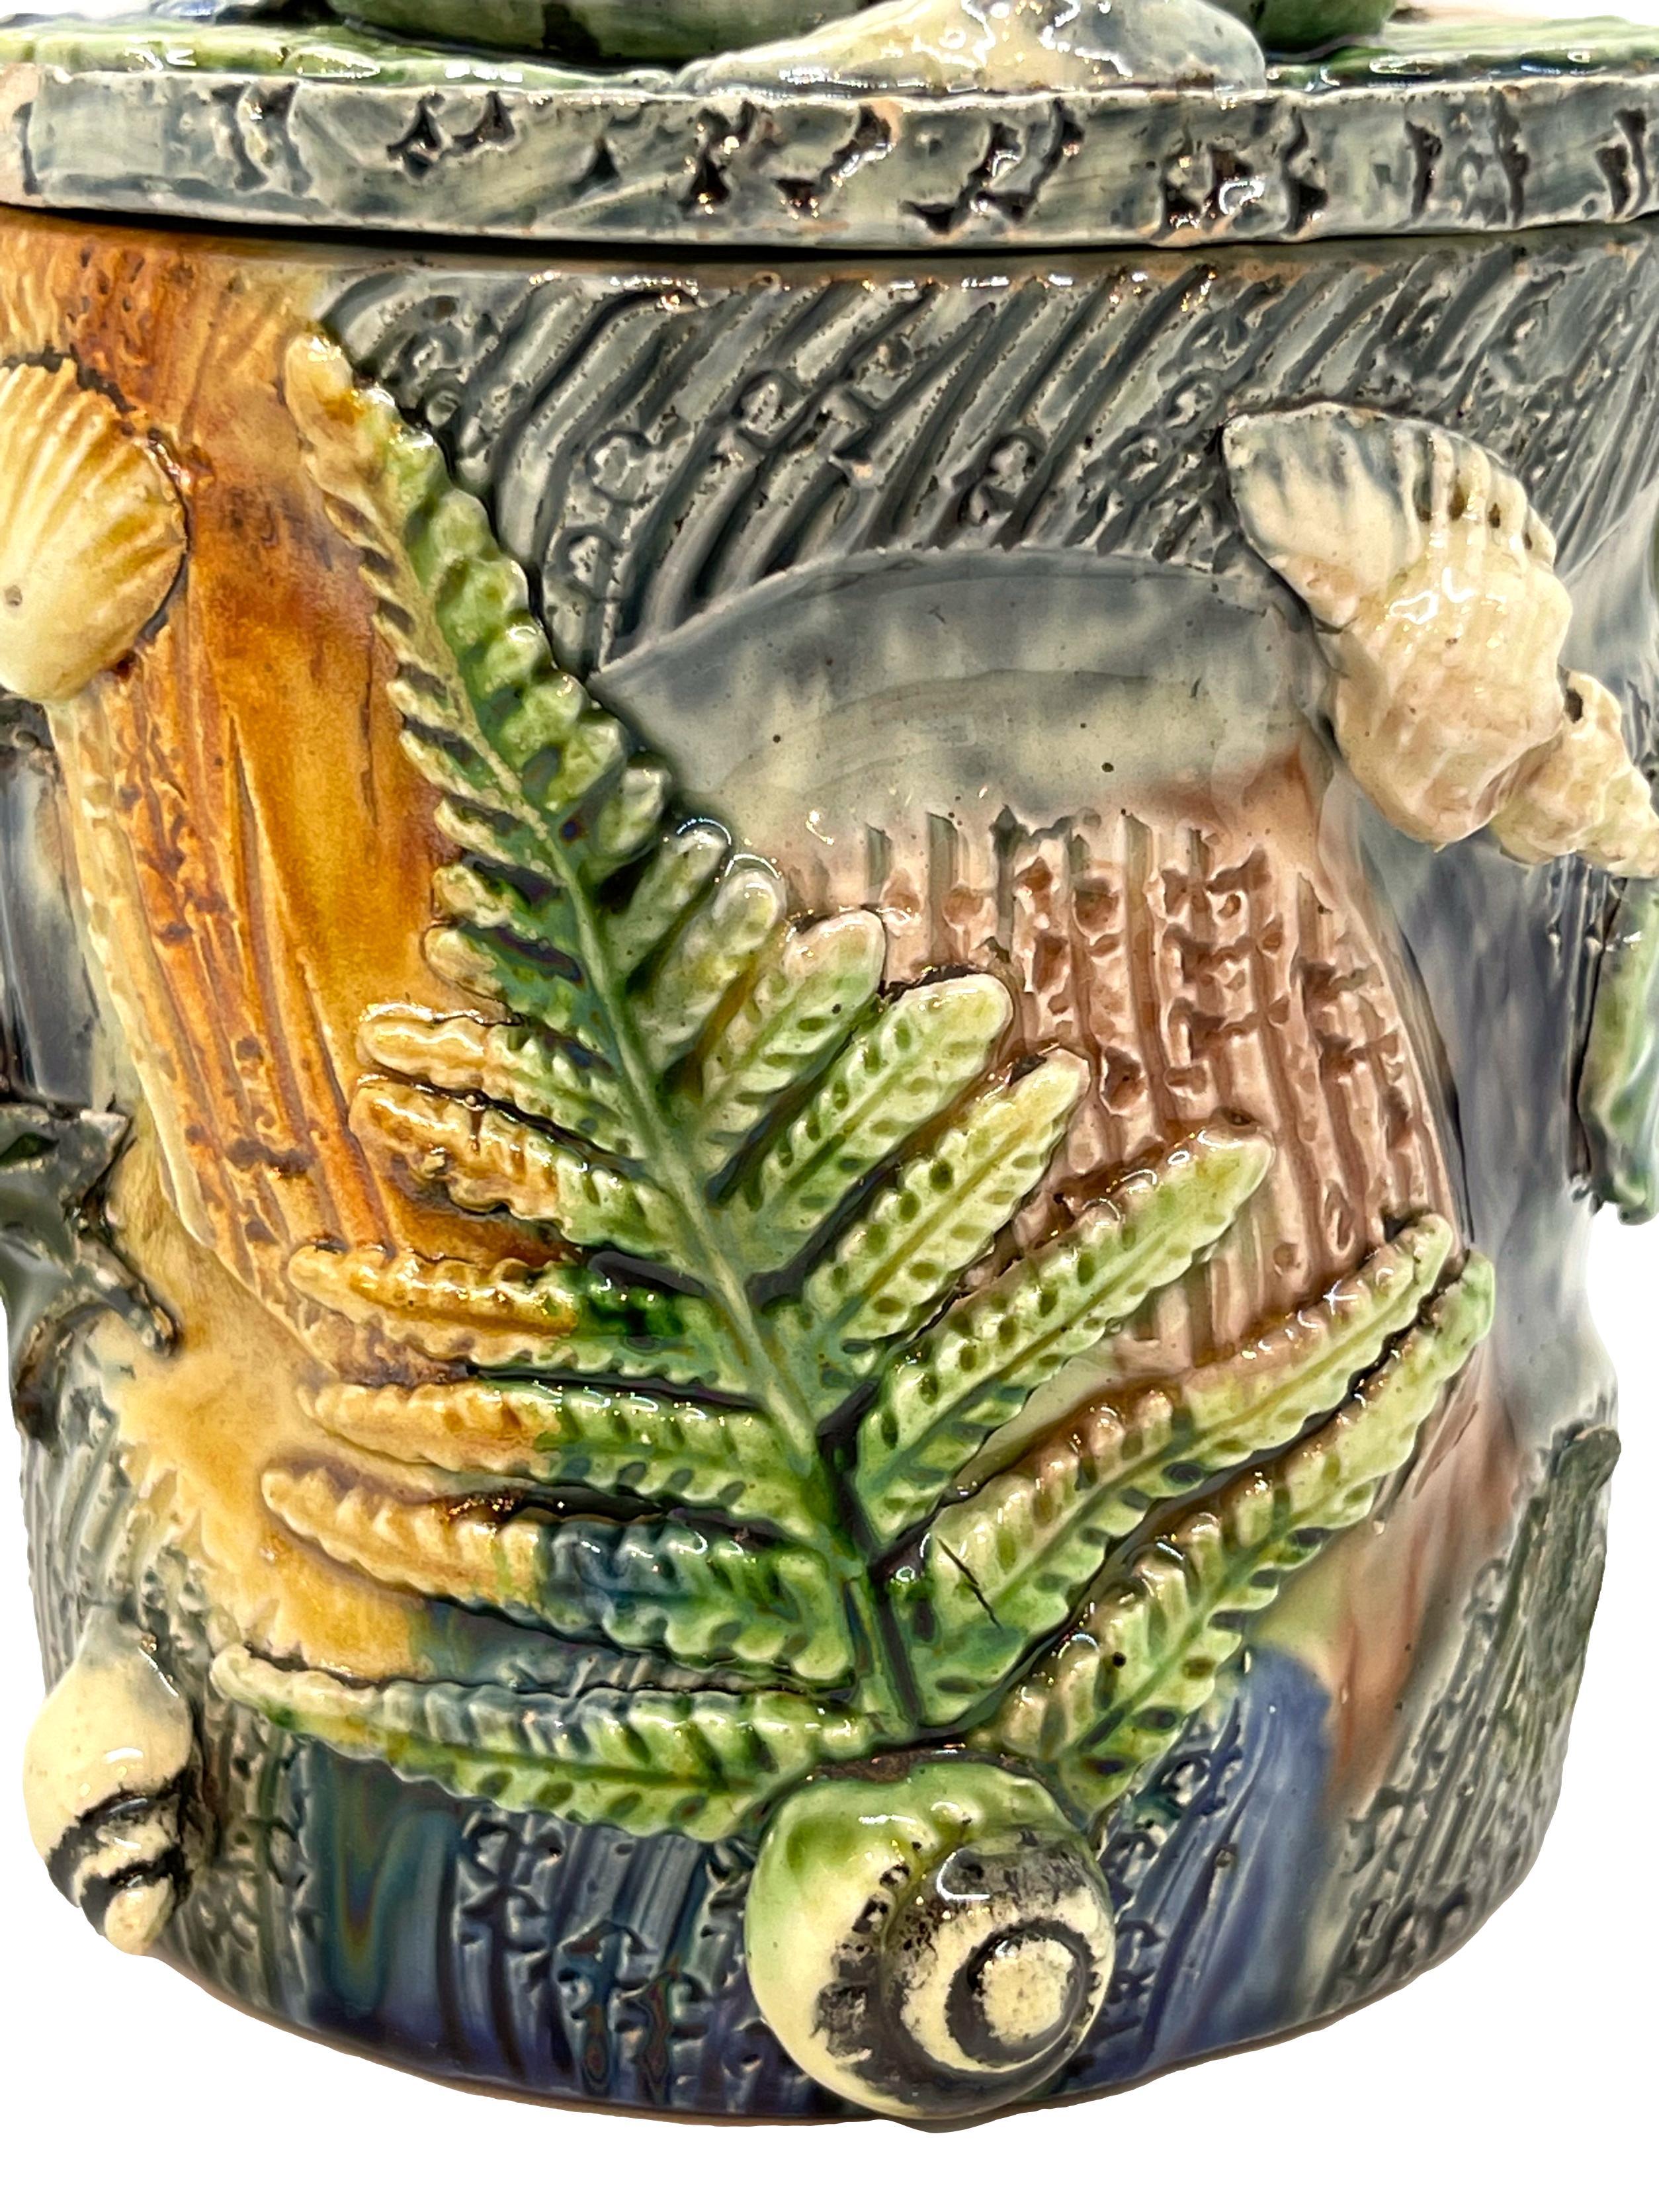 Thomas Sergent Majolica Palissy Ware Humidor with Coiled Snake on Lid, ca, 1880  7